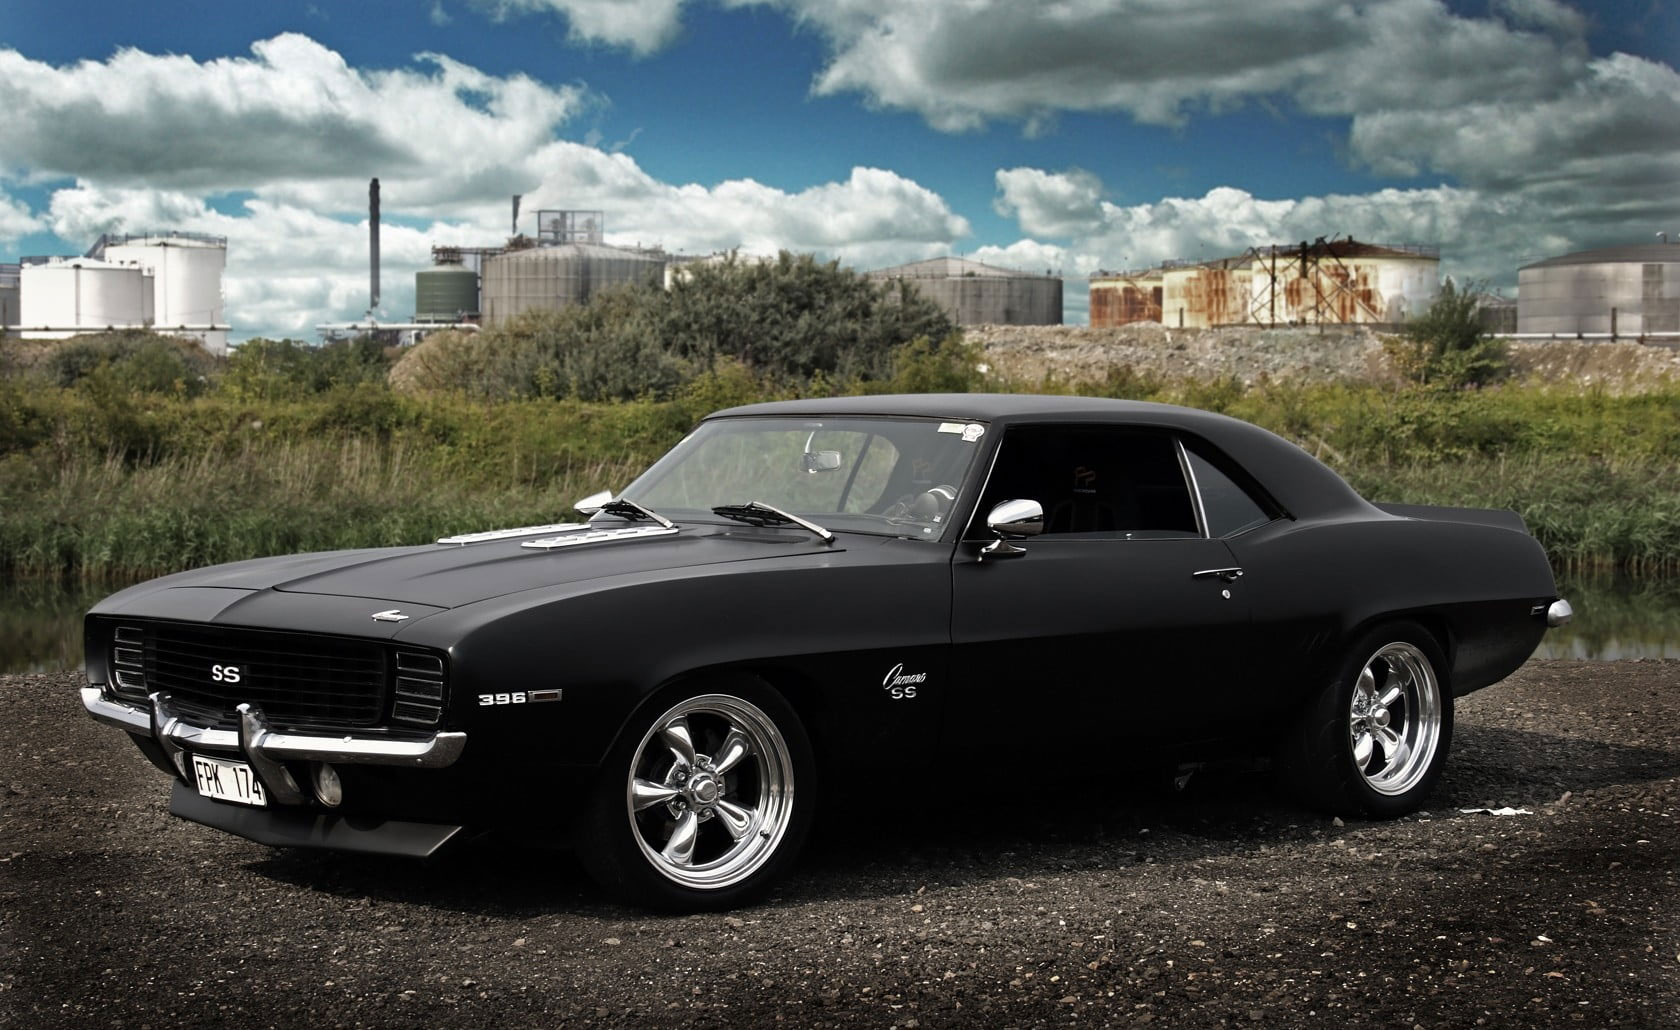 Black muscle car wallpaper, Chevrolet Camaro SS, muscle cars, mode of transportation